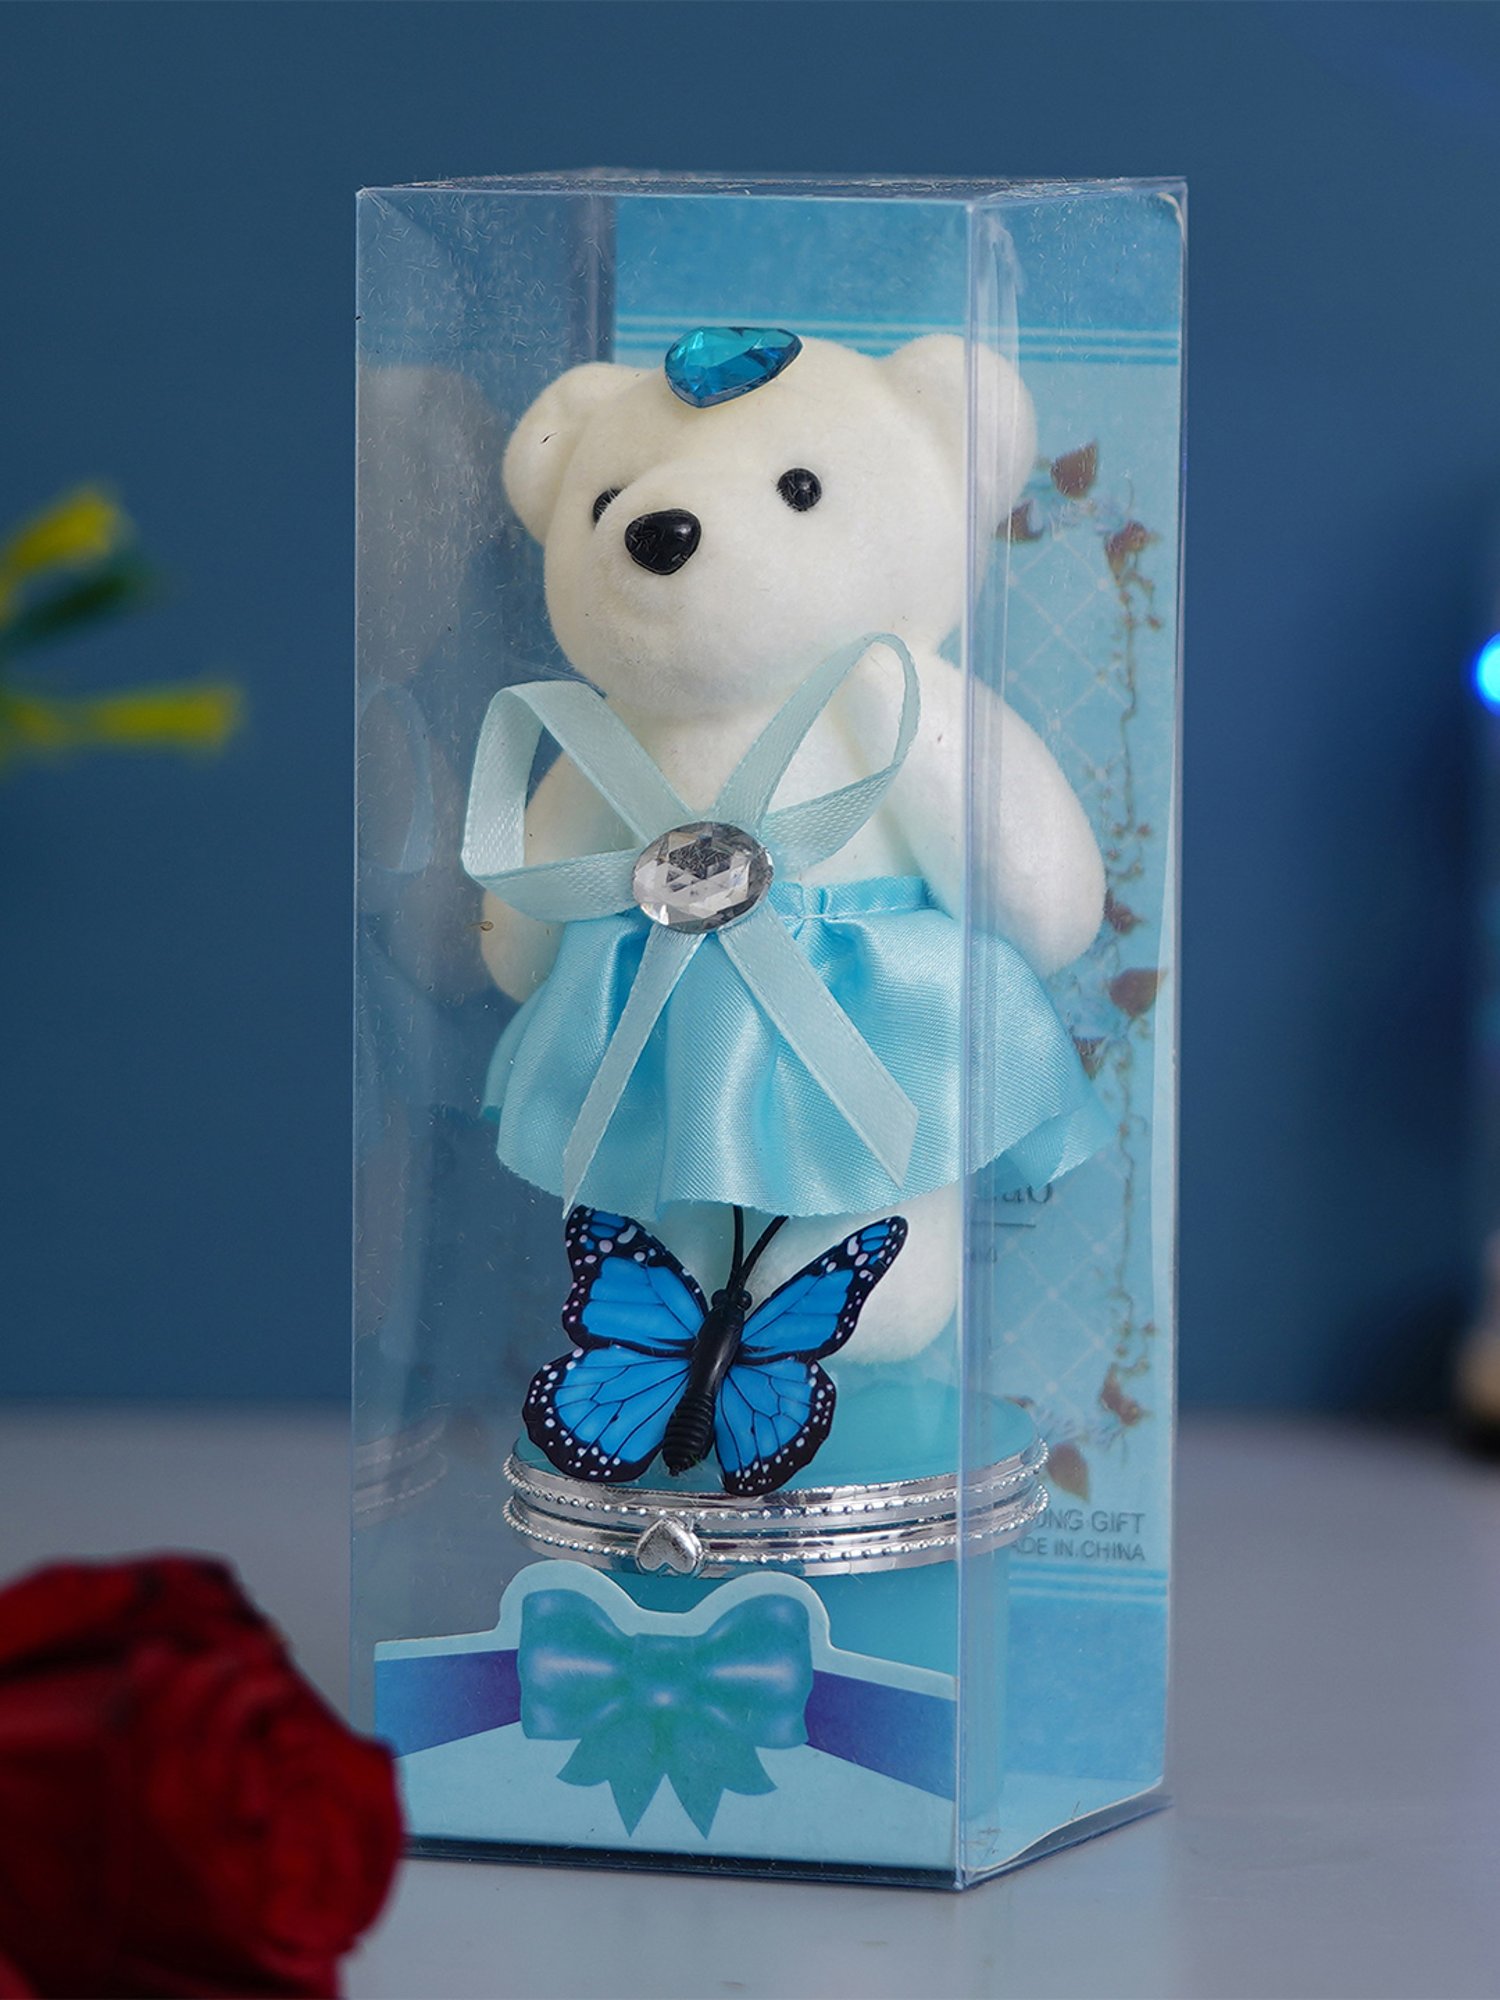 Kriid Small Teddy Bear Soft Toys for Kids Boys Girls for Birthday Gift Set  of 6 at Rs 800 in New Delhi